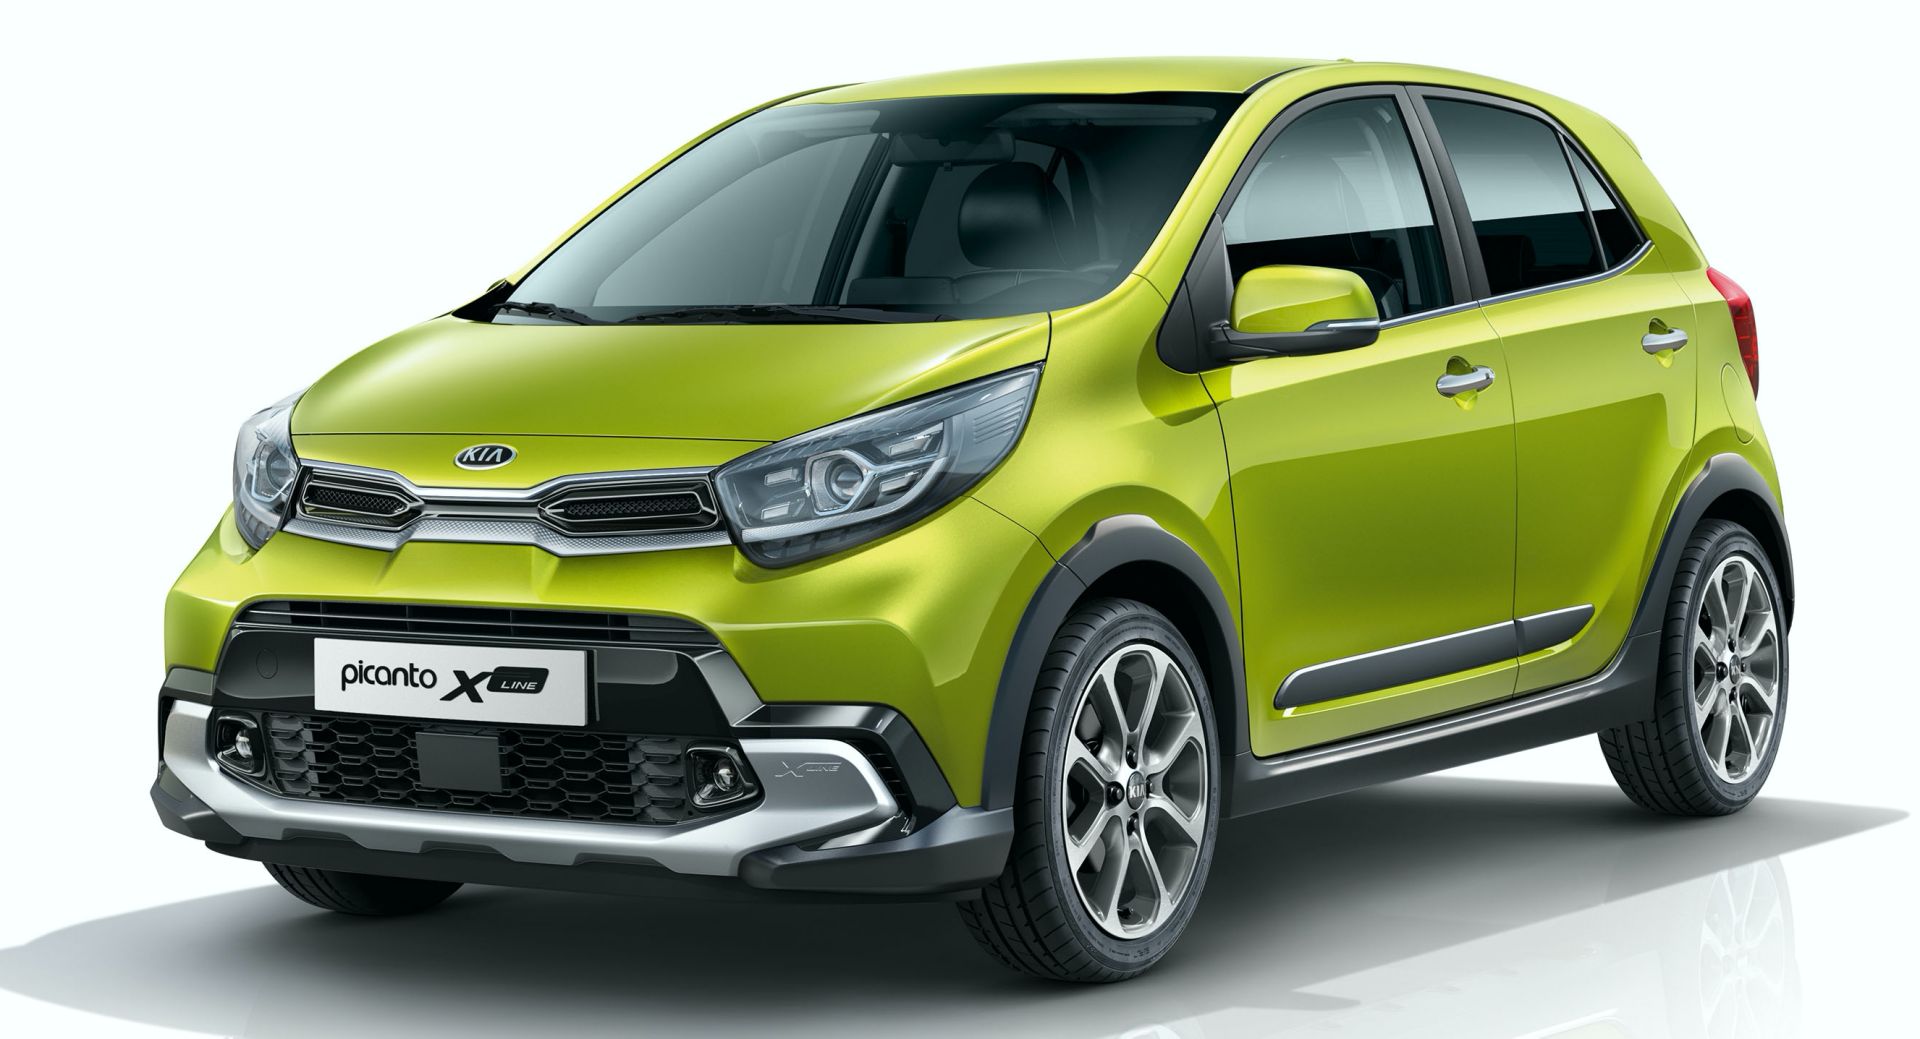 2021 Kia Picanto Debuts In Europe With Updated Styling, Tech From